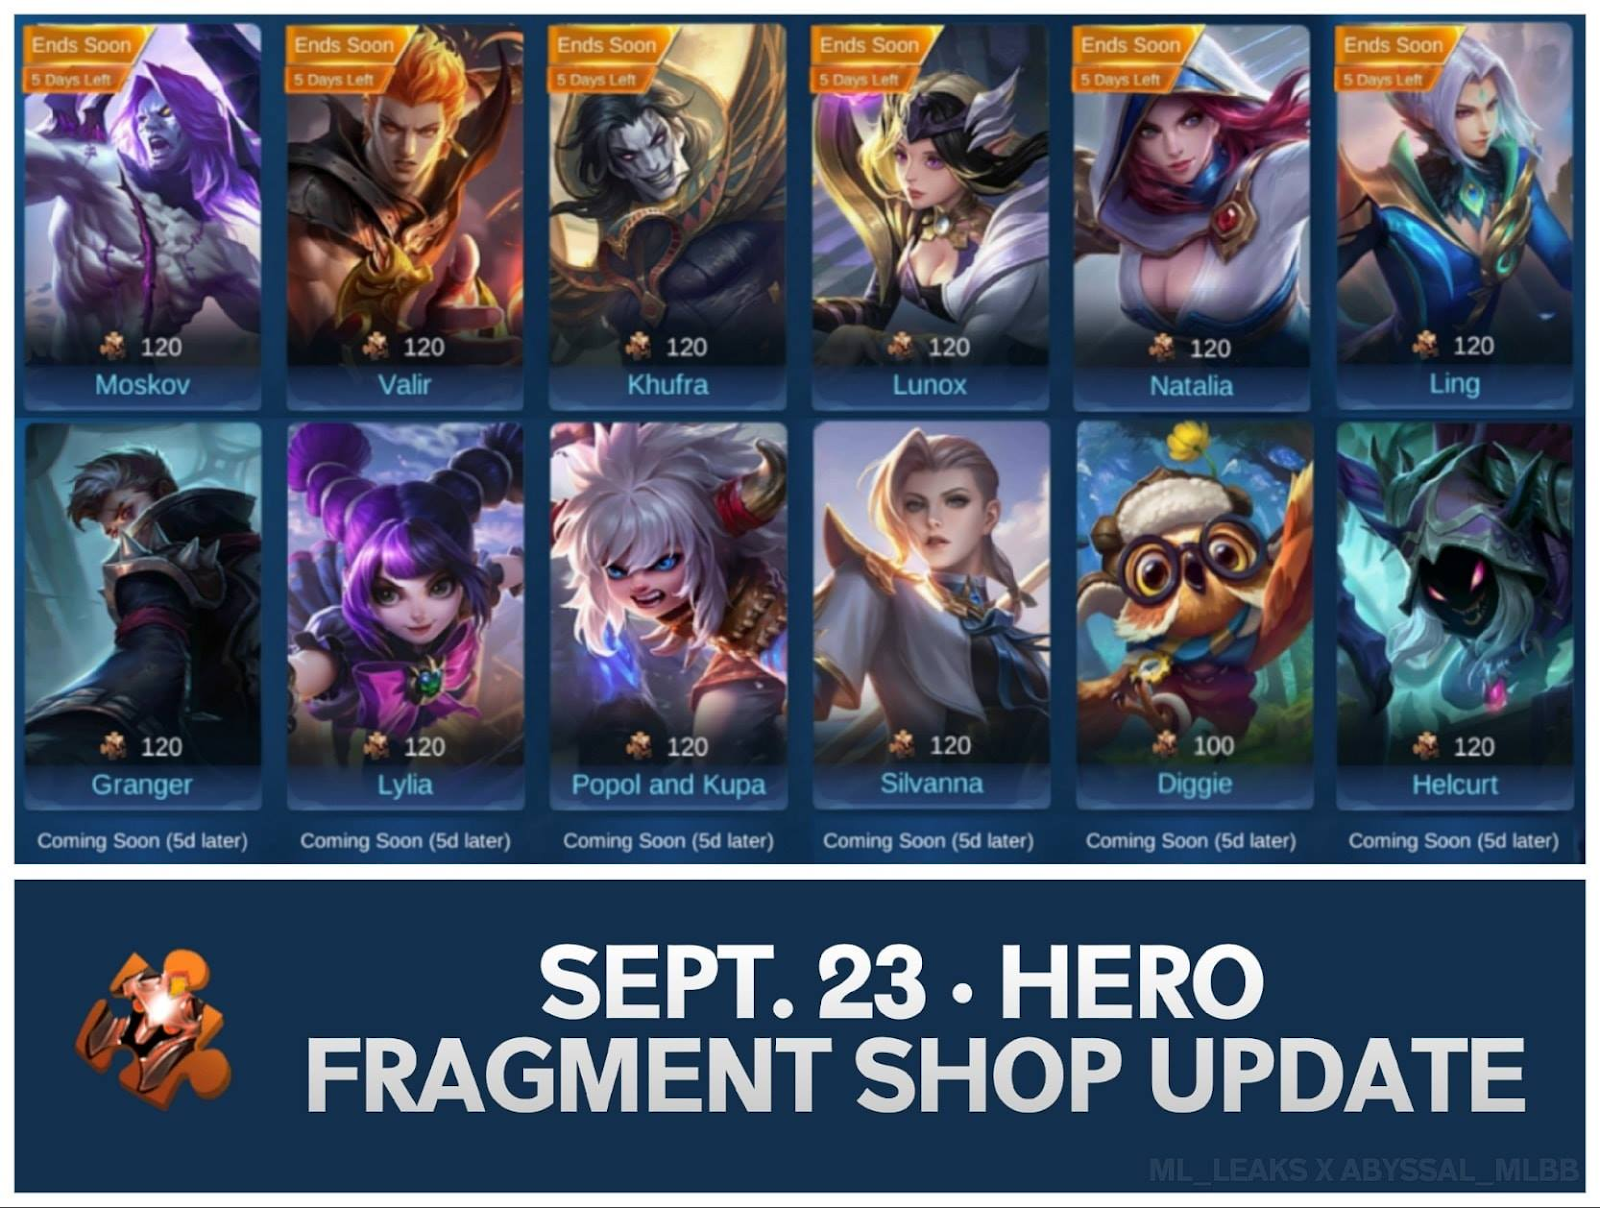 Collecting 100+ Hero Fragments is a very challenging task.